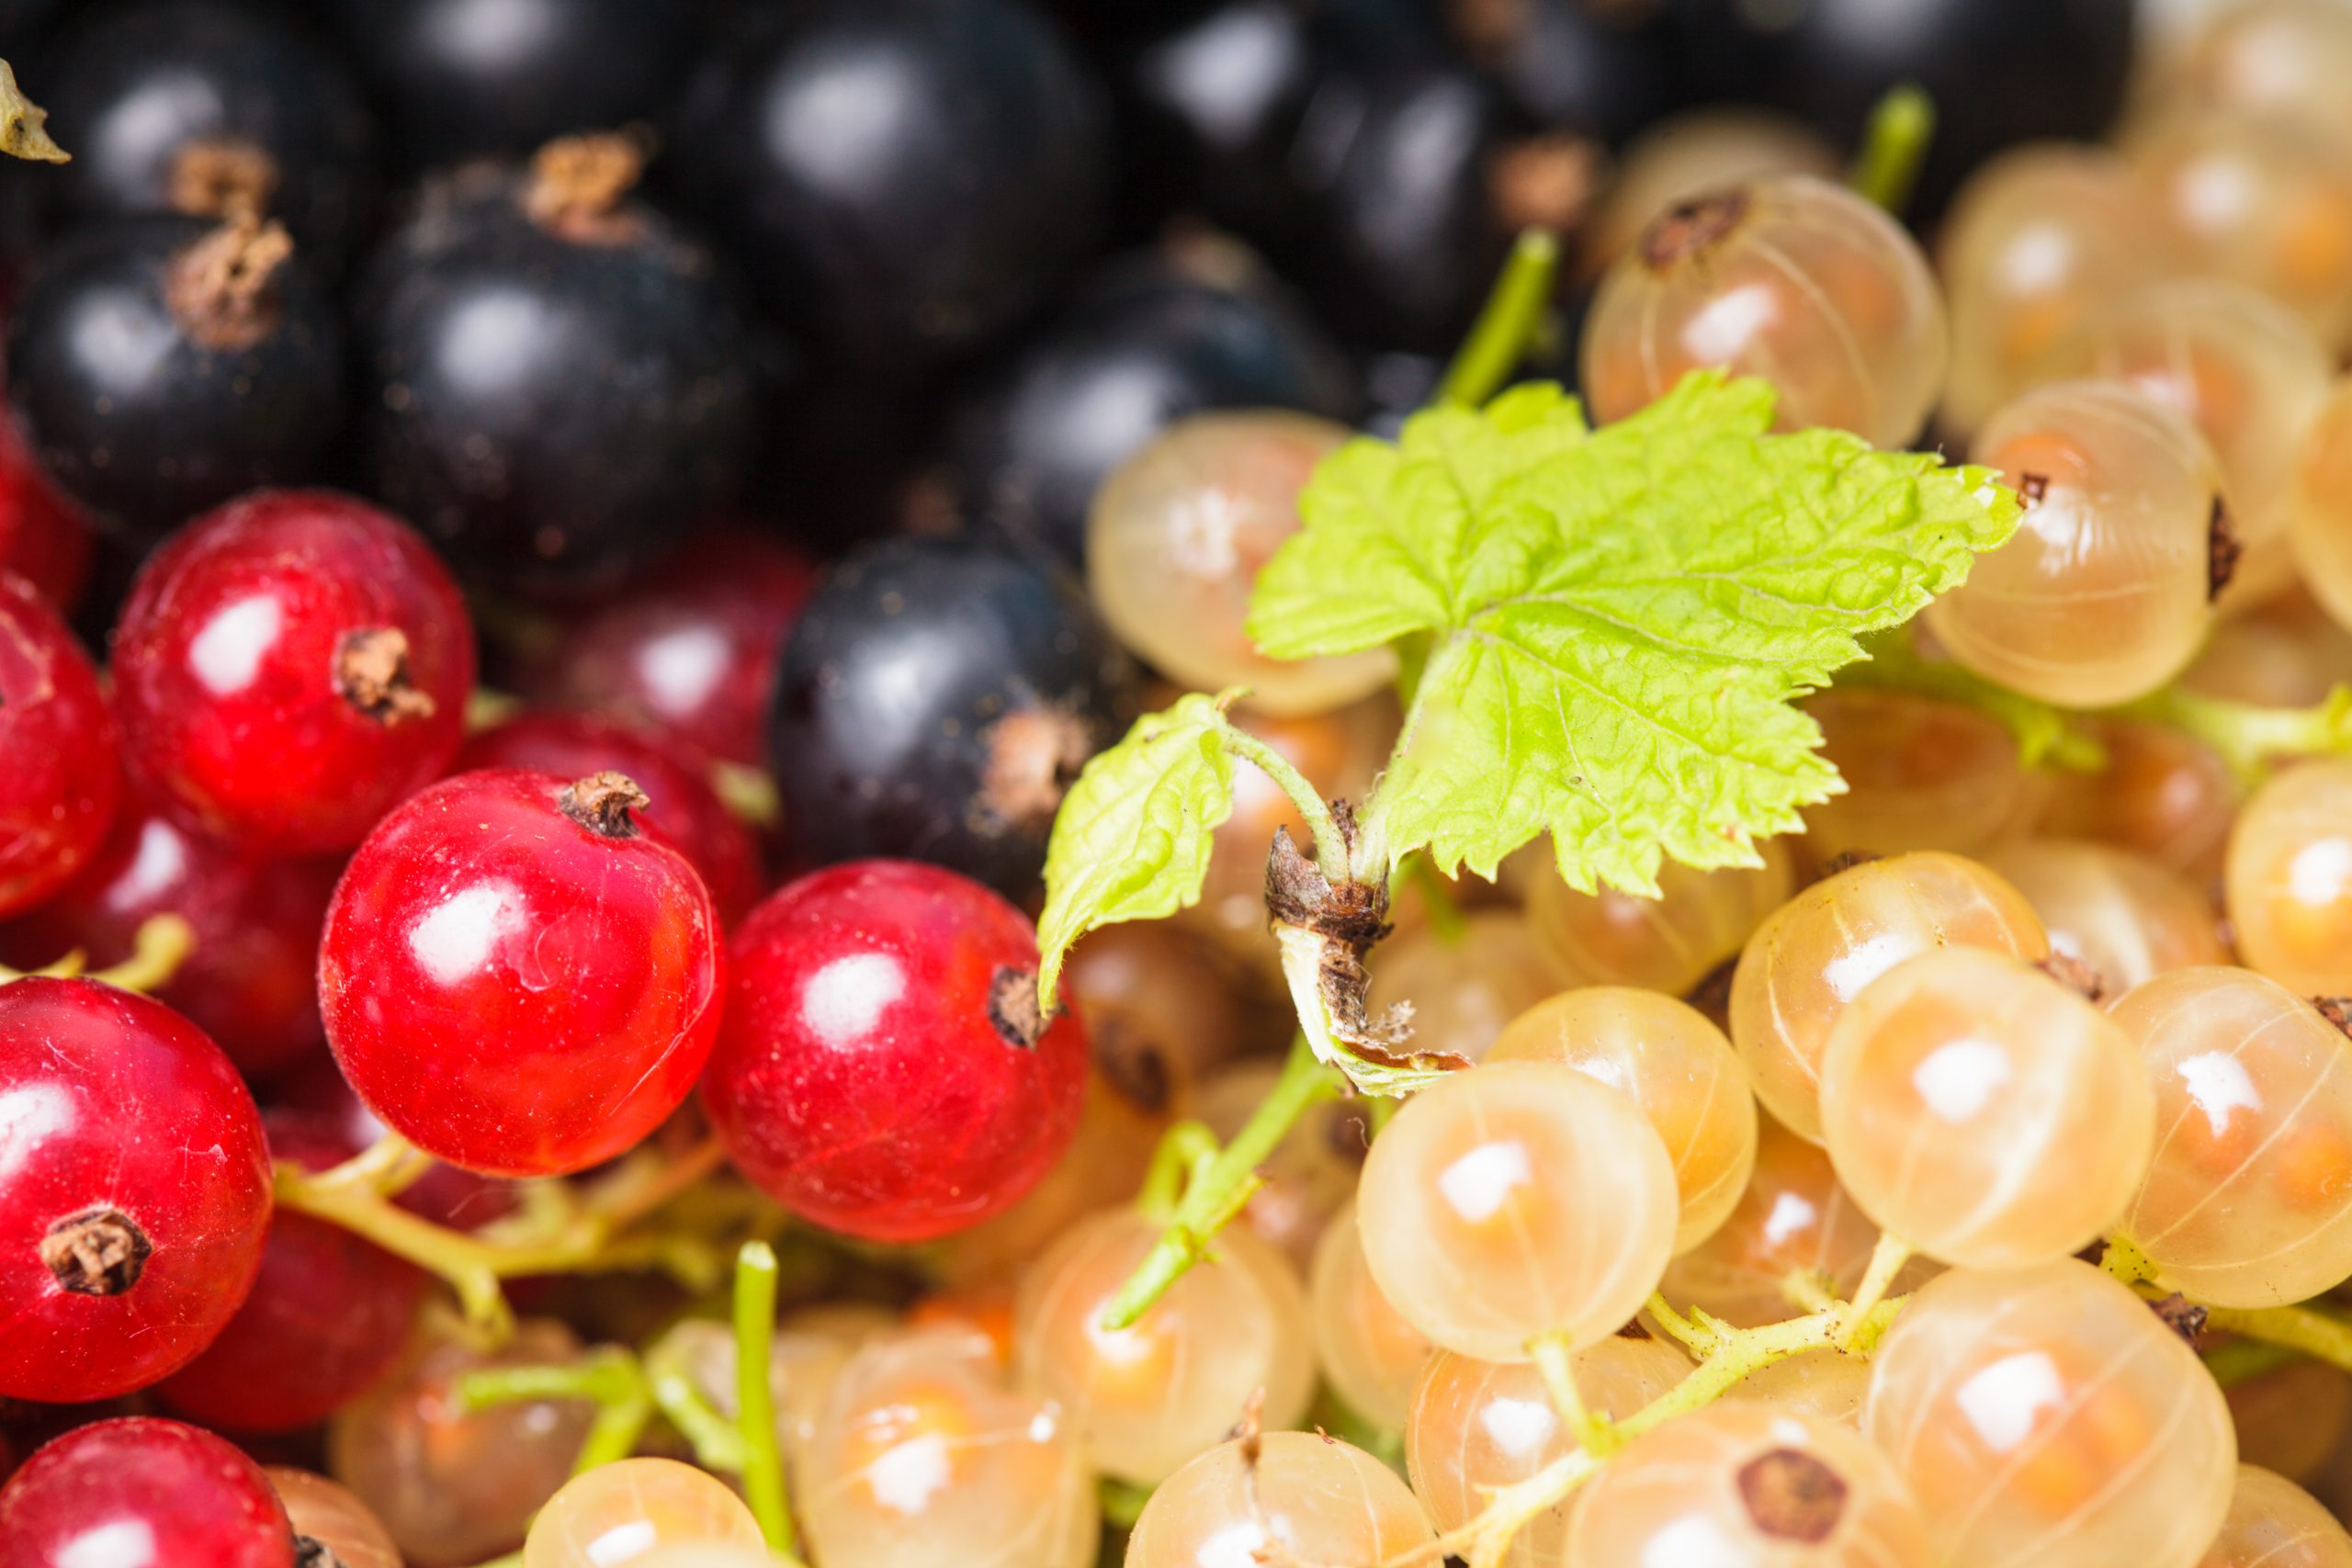 currants types white red black berries